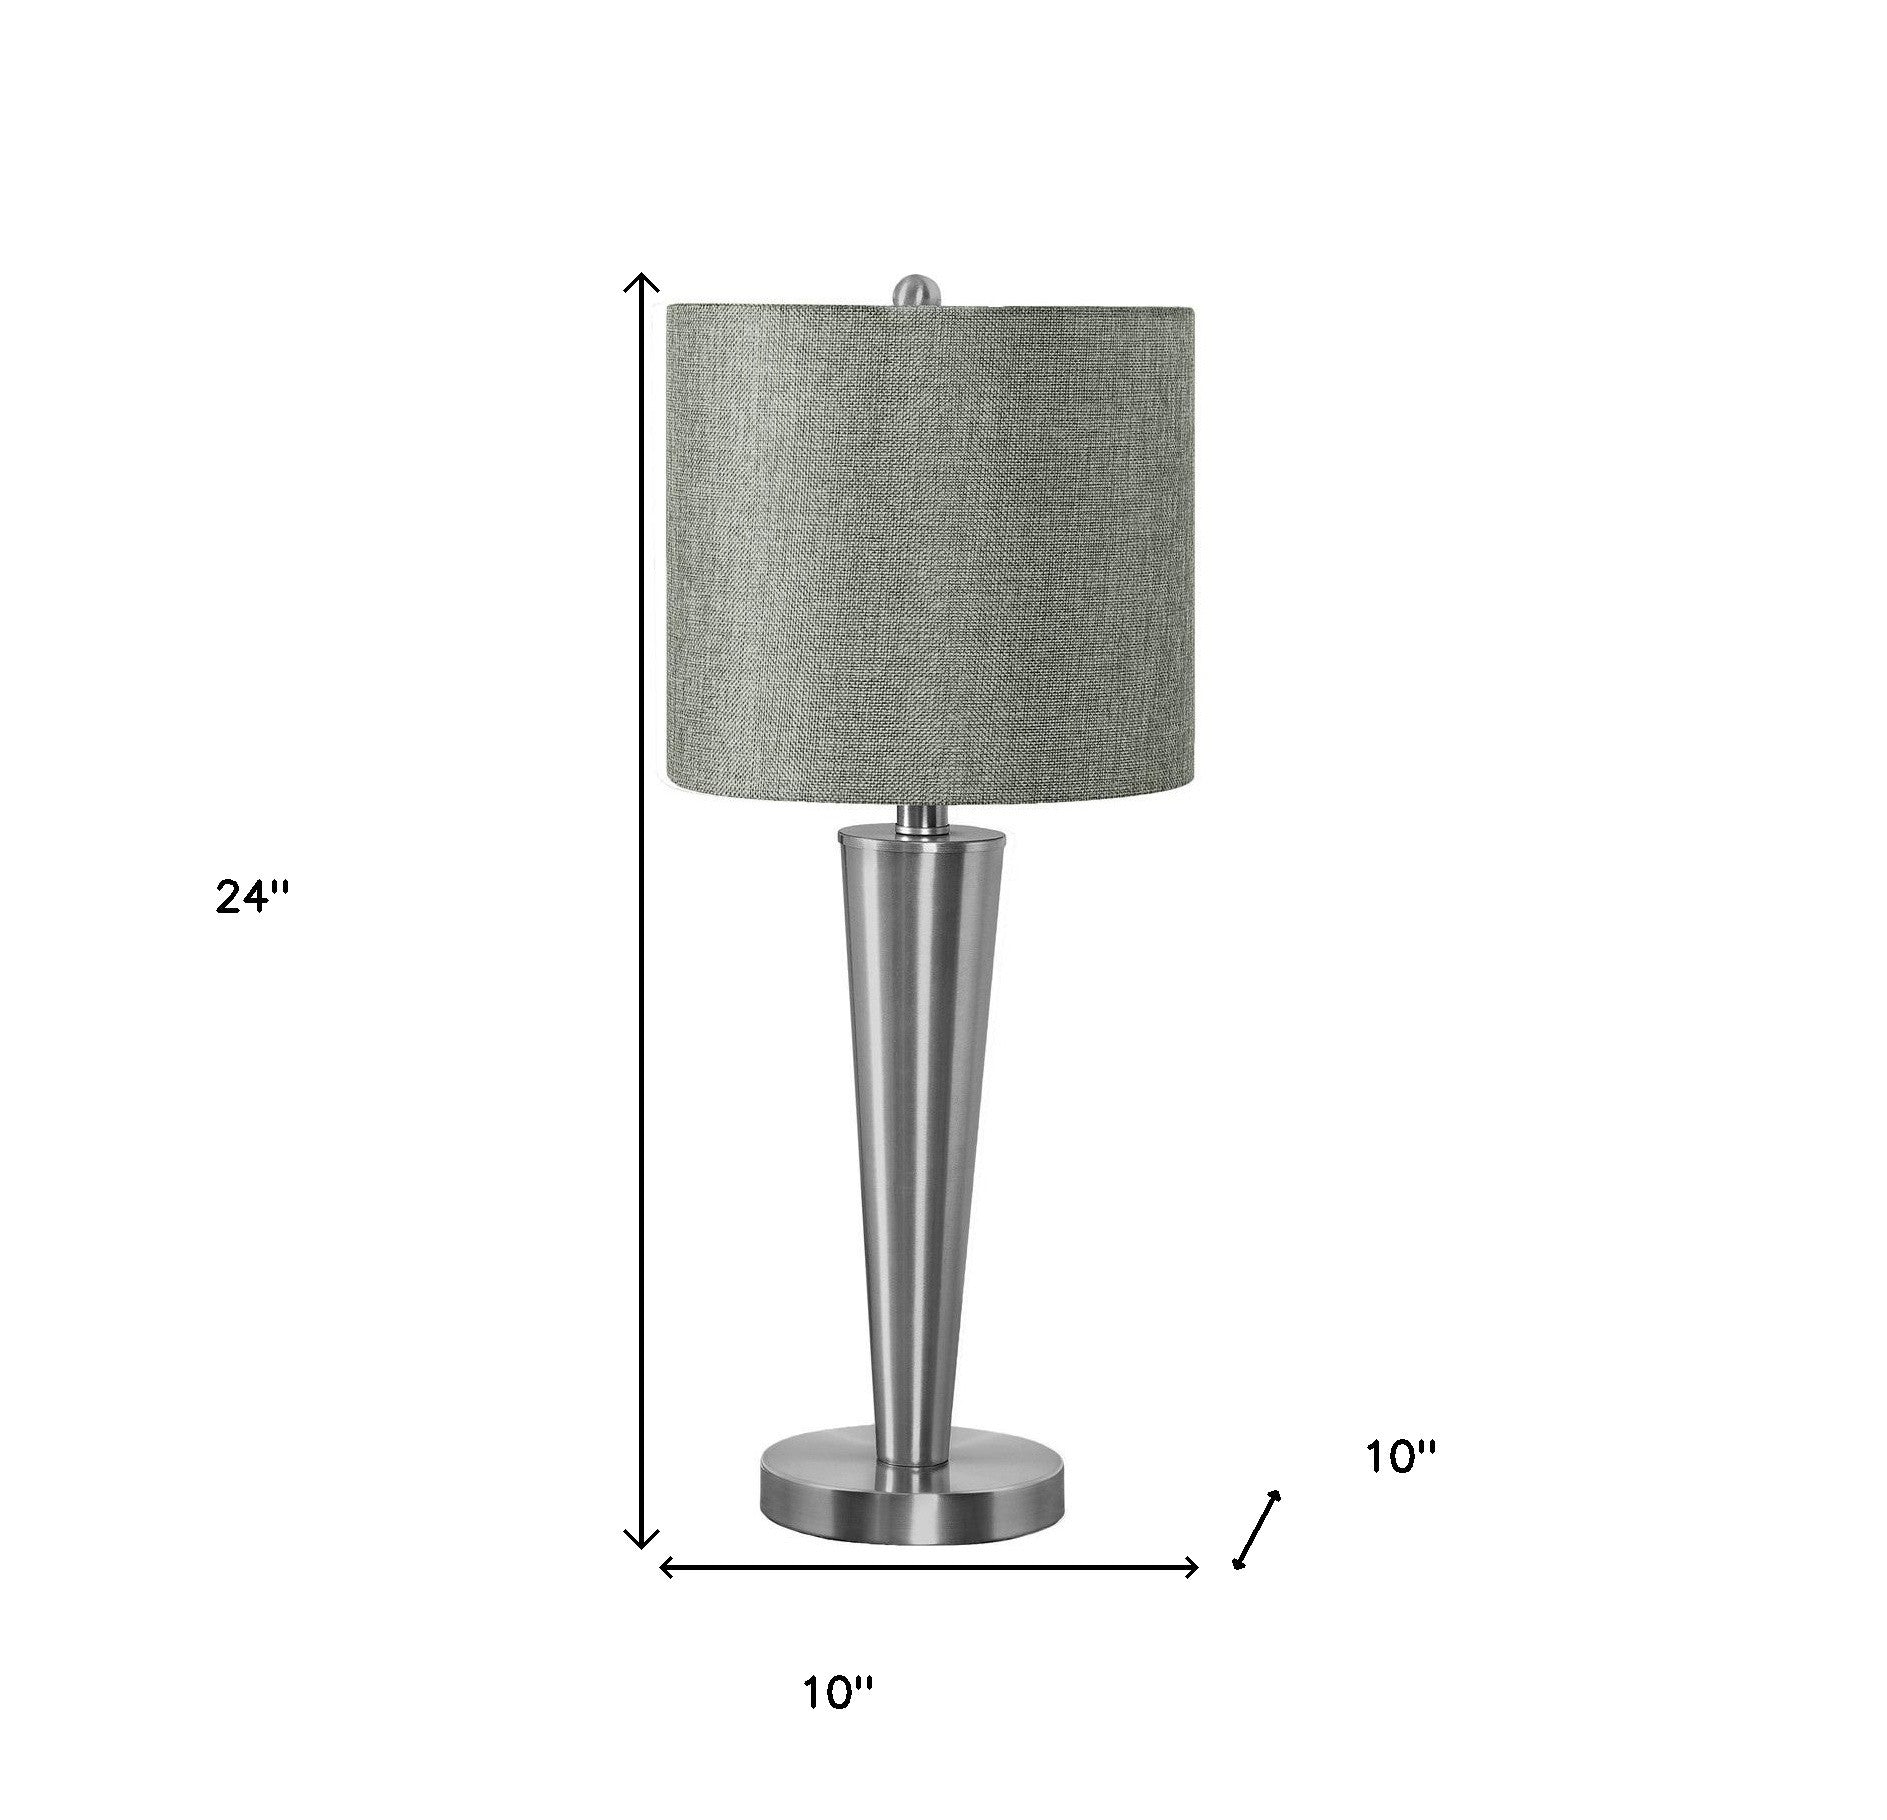 Set of Two 24" Silver Metal Candlestick USB Table Lamps With Gray Drum Shades